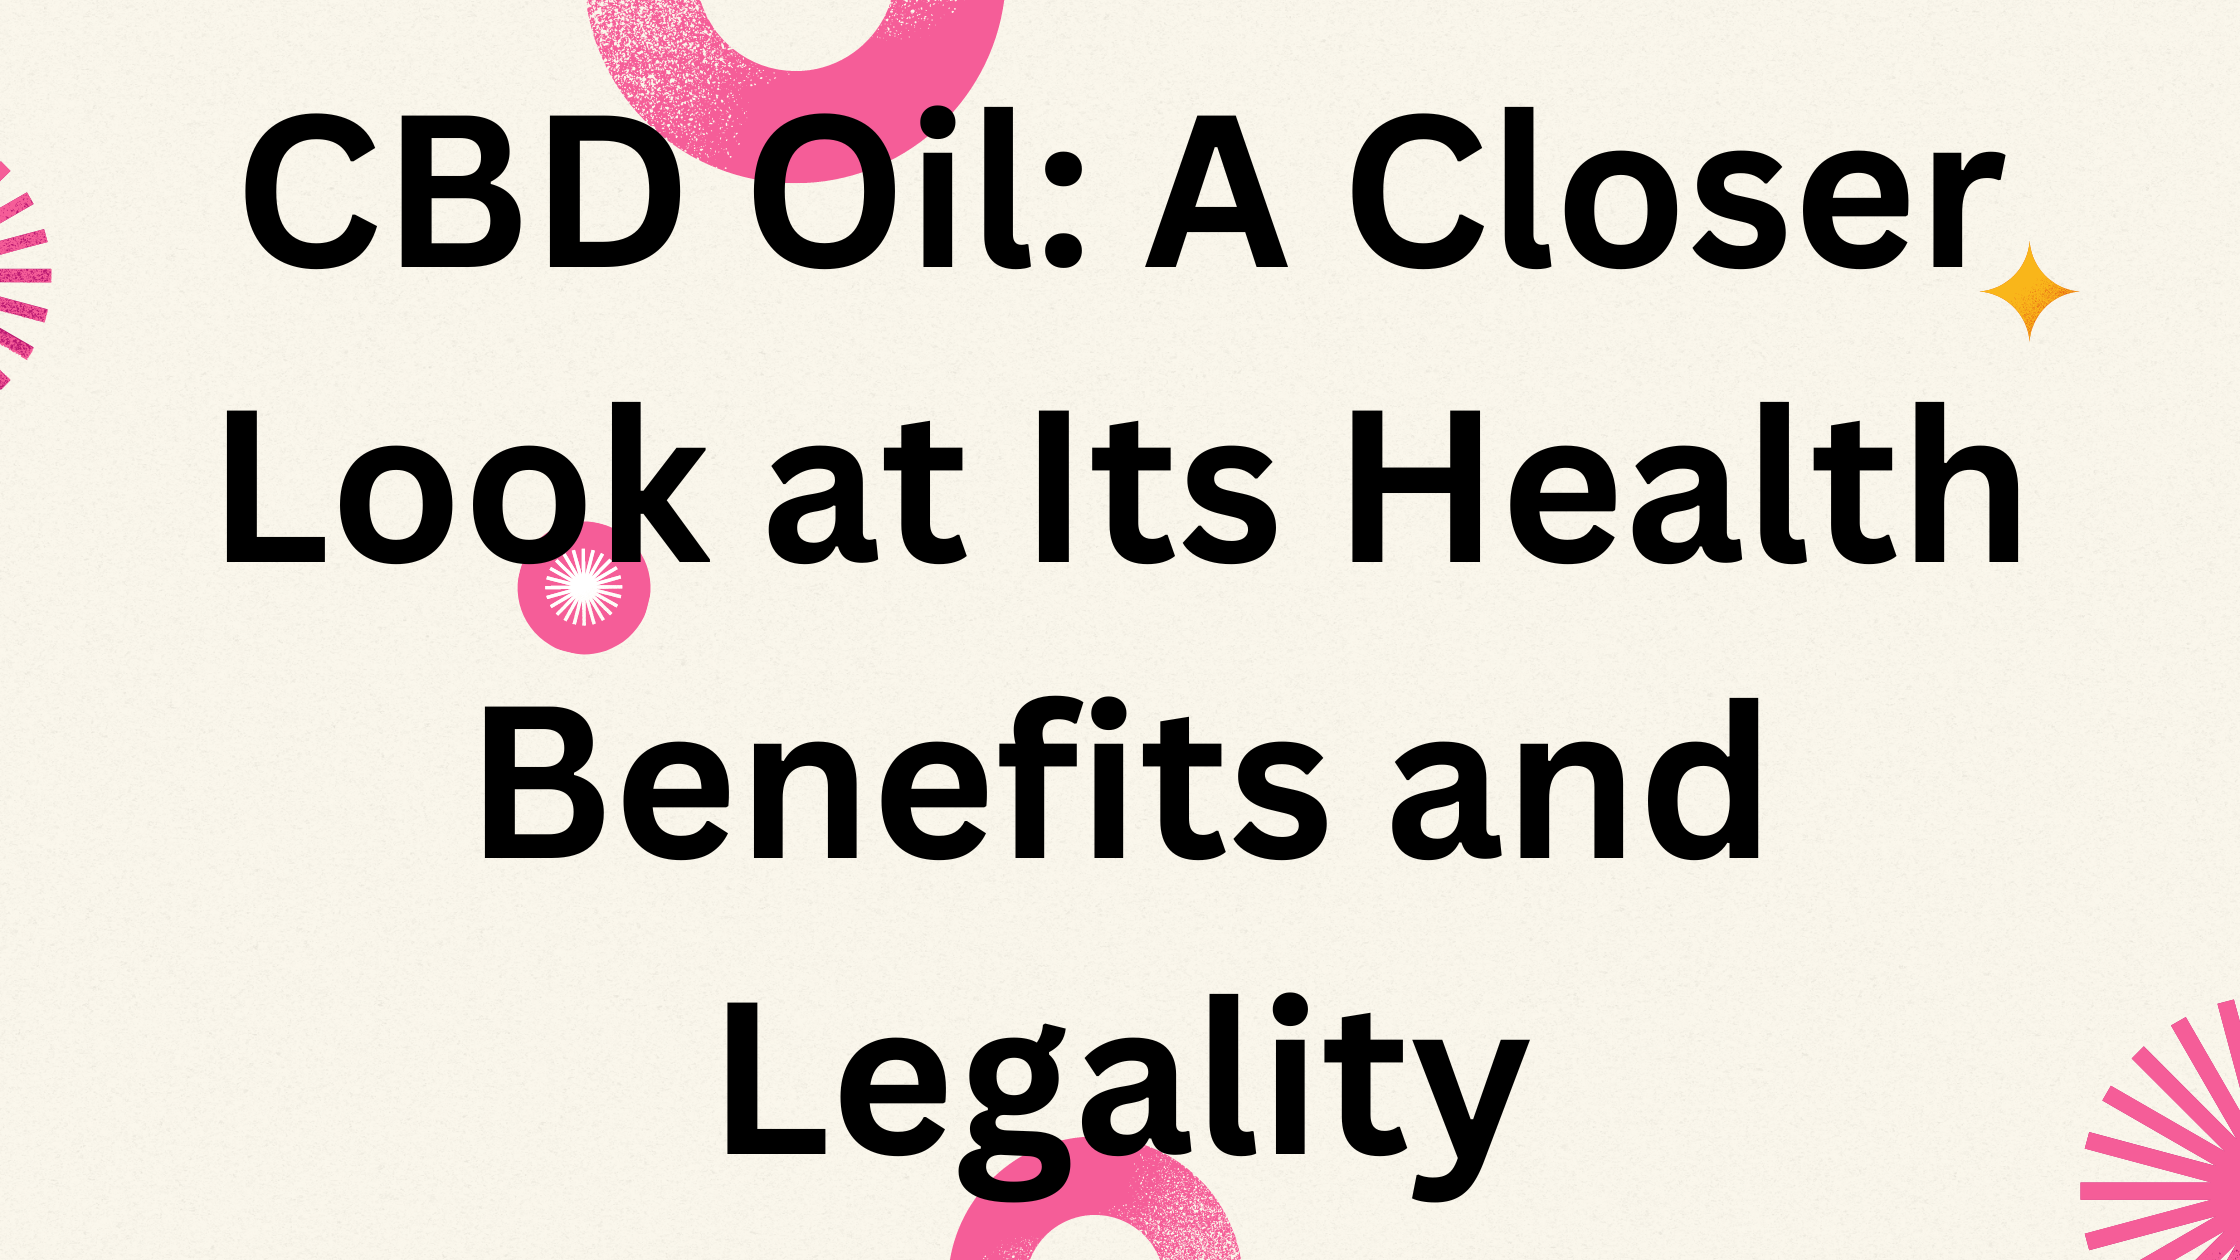 CBD Oil: A Closer Look at Its Health Benefits and Legality